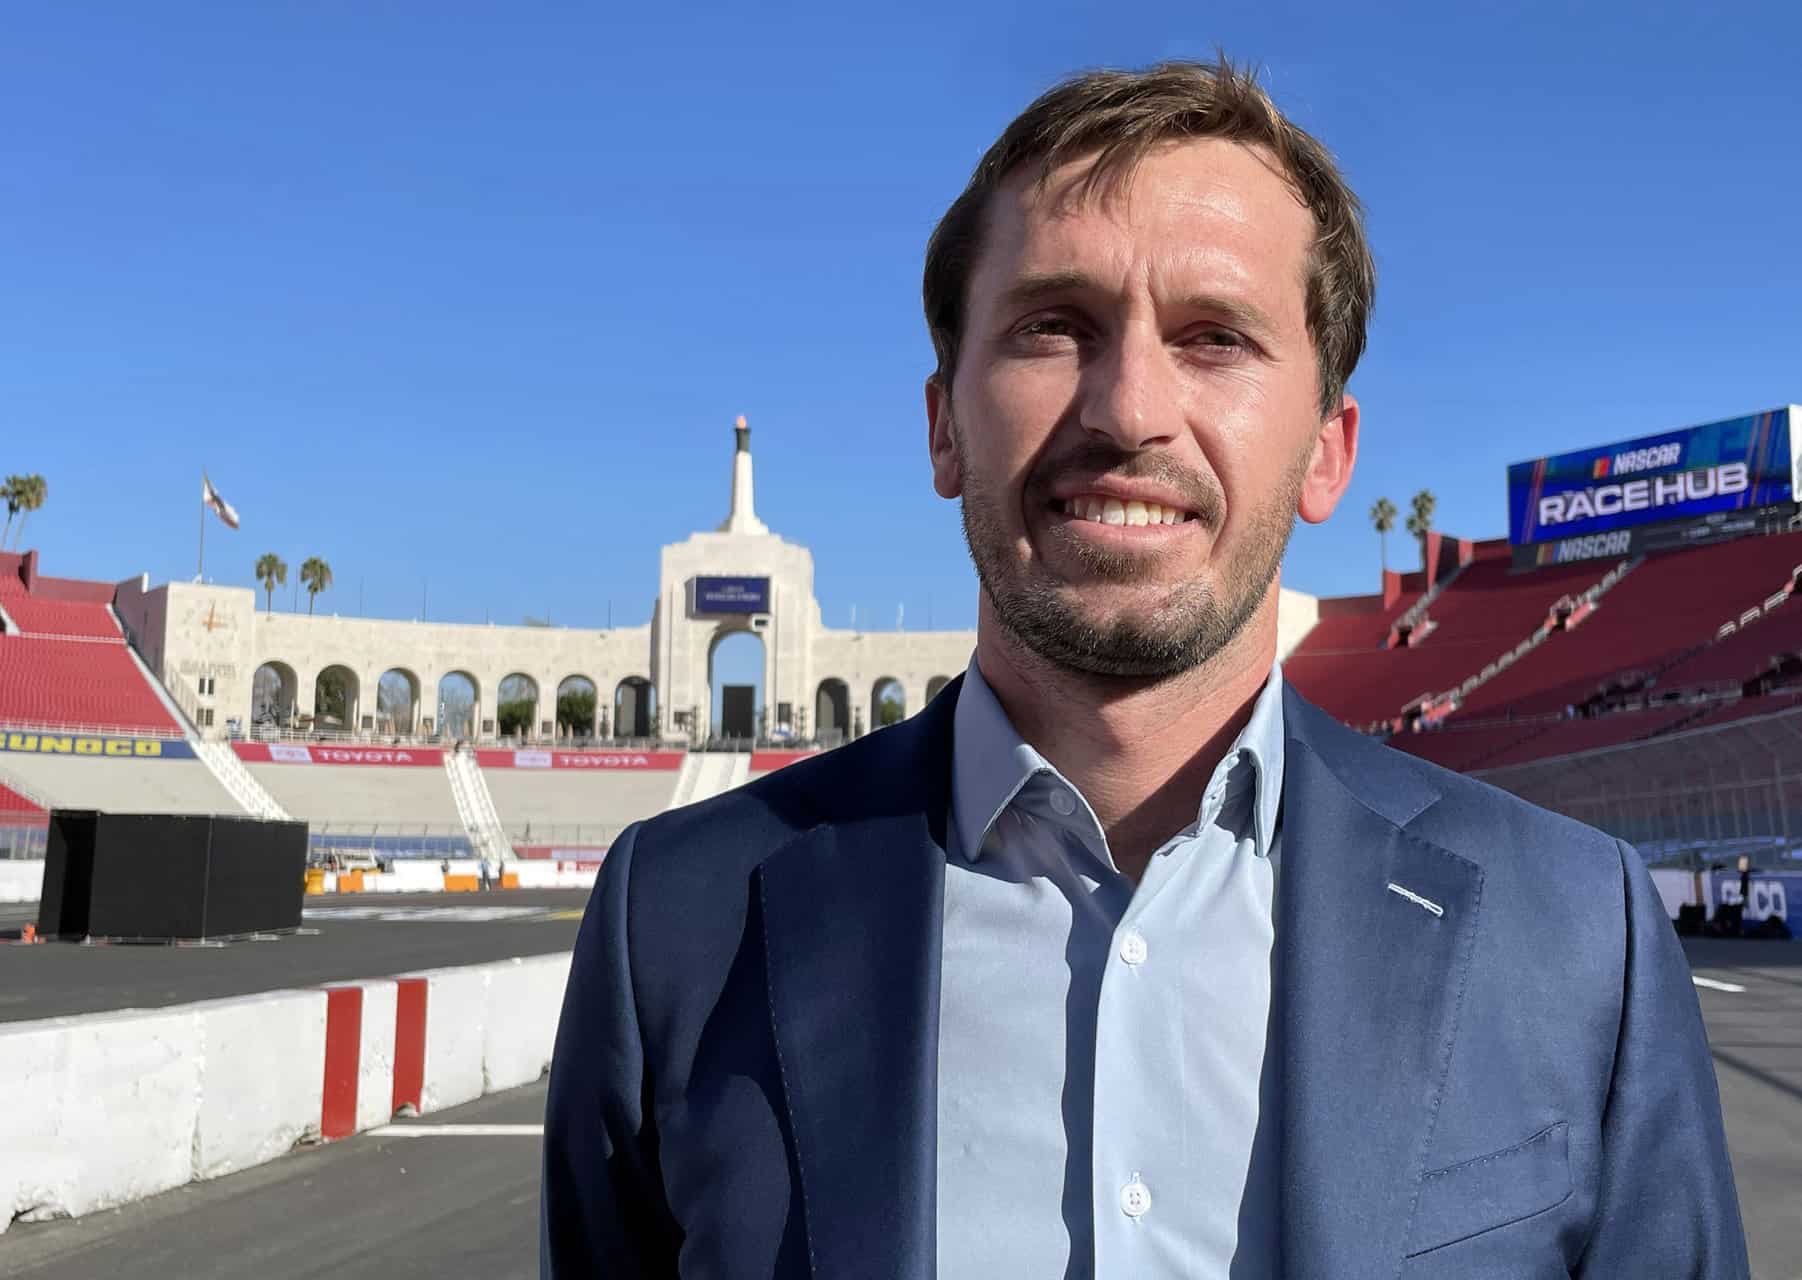 NASCAR's Senior Vice President of Strategy and Innovation, Ben Kennedy, stands on the front stretch of the temporary asphalt racetrack built inside the Los Angeles Memorial Coliseum. Photo by Jerry Jordan/Kickin' the Tires